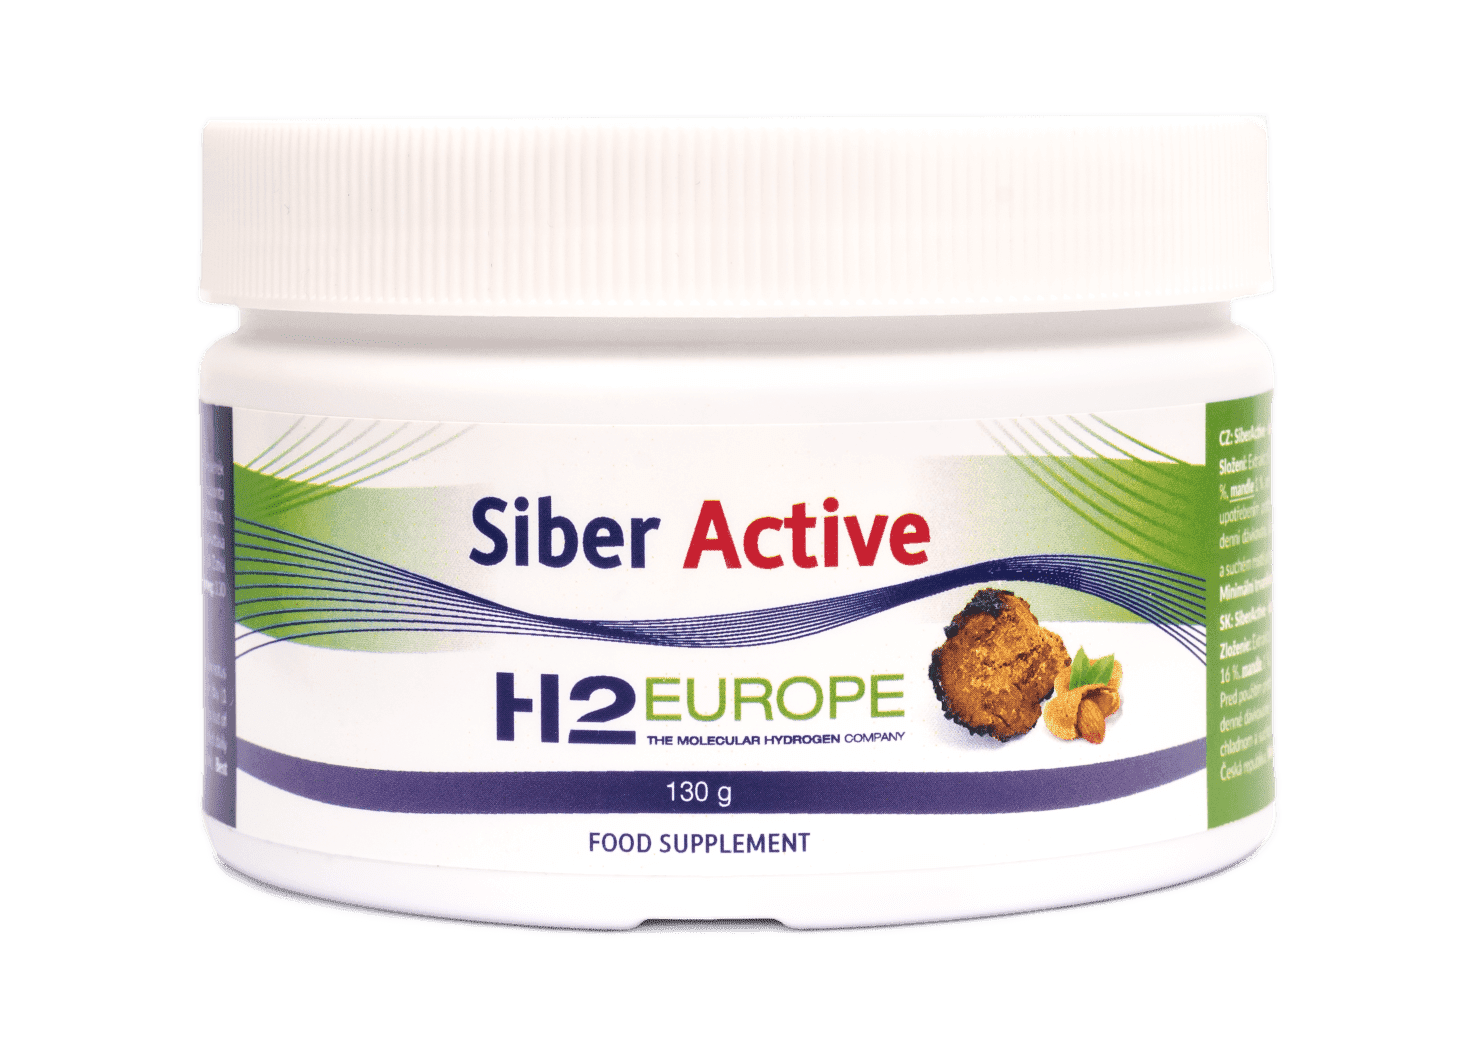 Siber active h2europe company